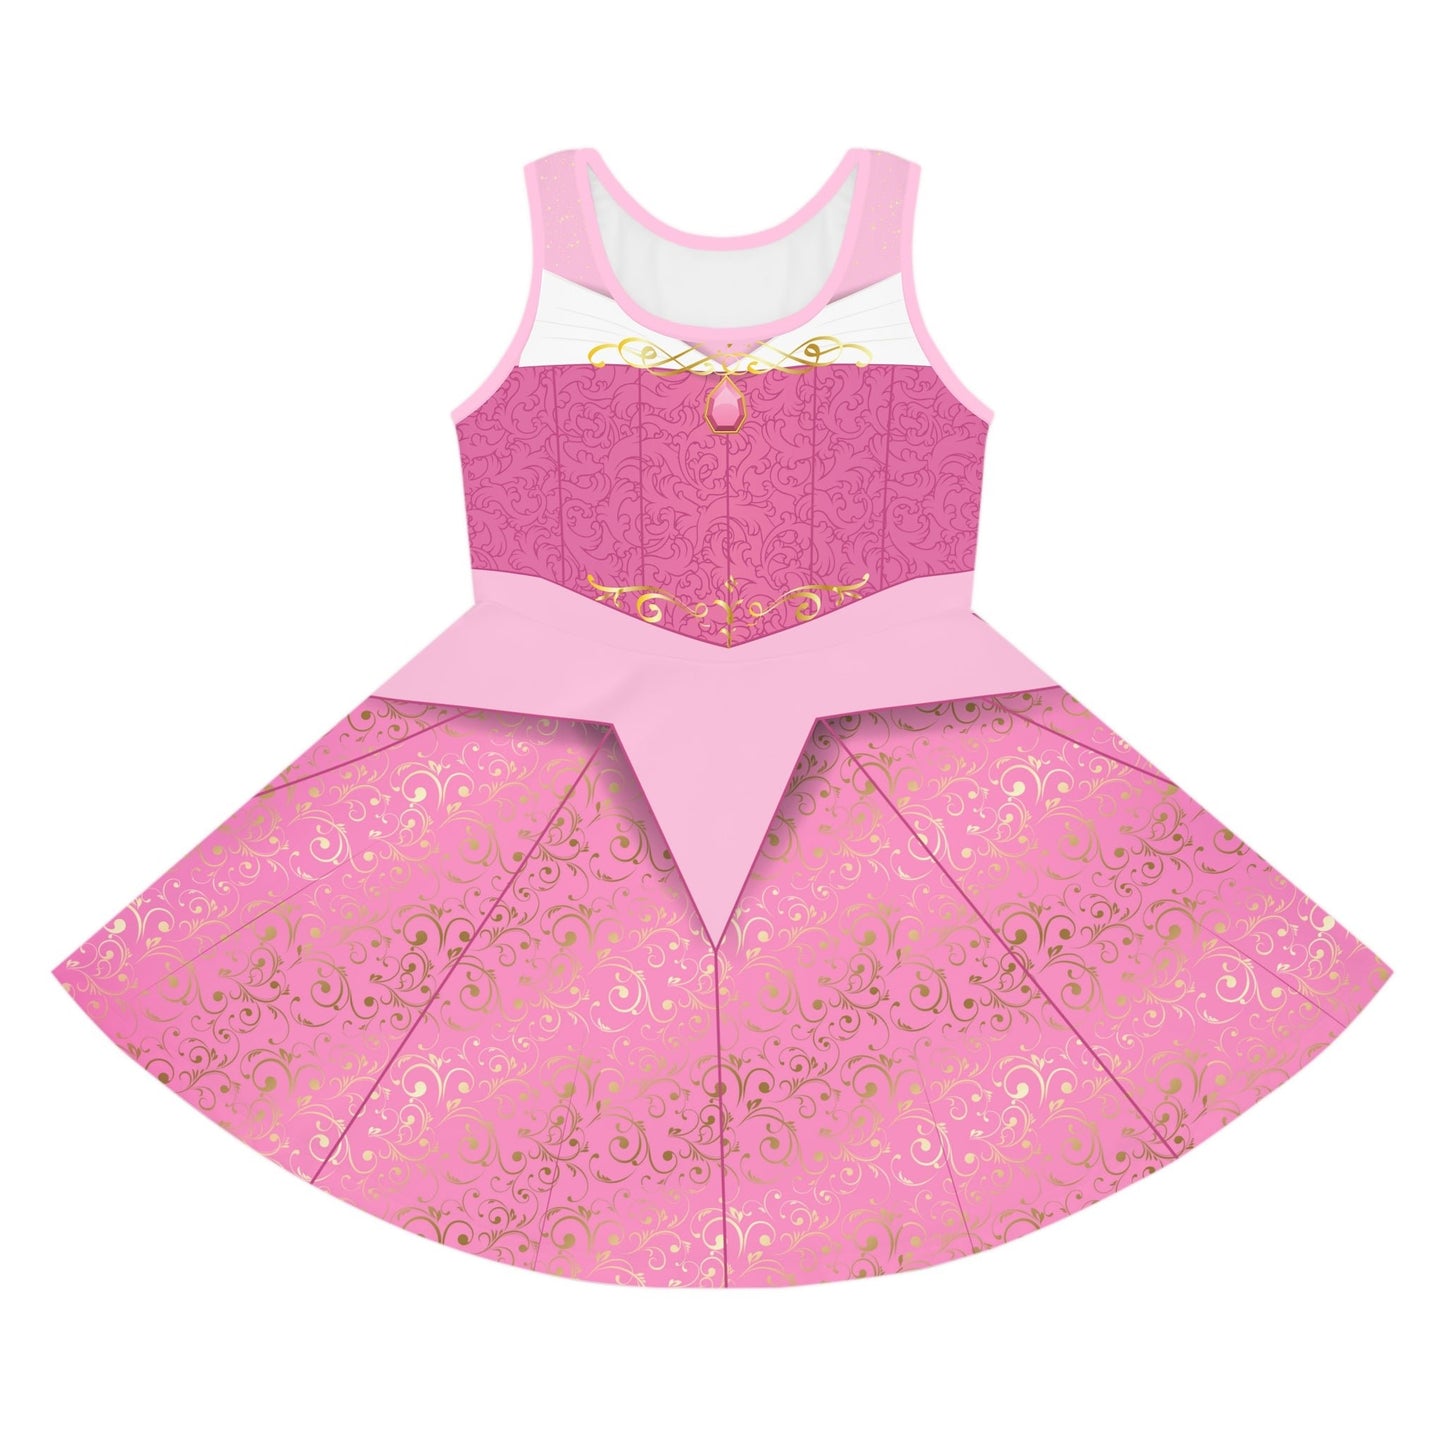 Sleeping Pink Princess Fancy Girls' Sleeveless Sundress - Costume, Cosplay All Over PrintAOPAOP Clothing#tag4##tag5##tag6#